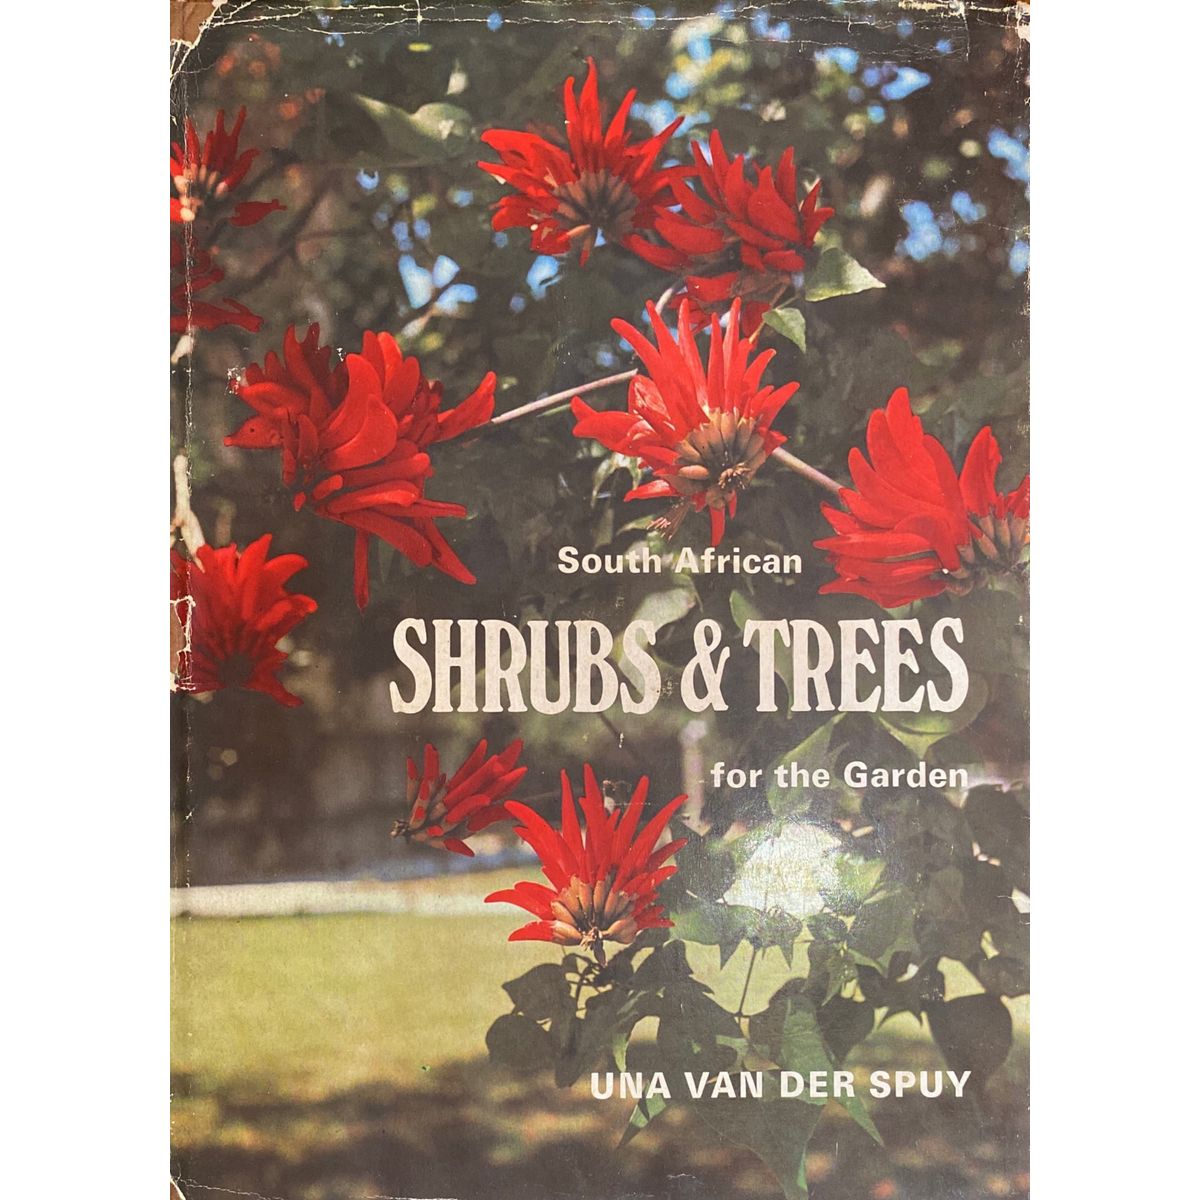 ISBN: 9780949997043 / 0949997048 - South African Shrubs and Trees for the Garden by Una Van Der Spuy [1976]